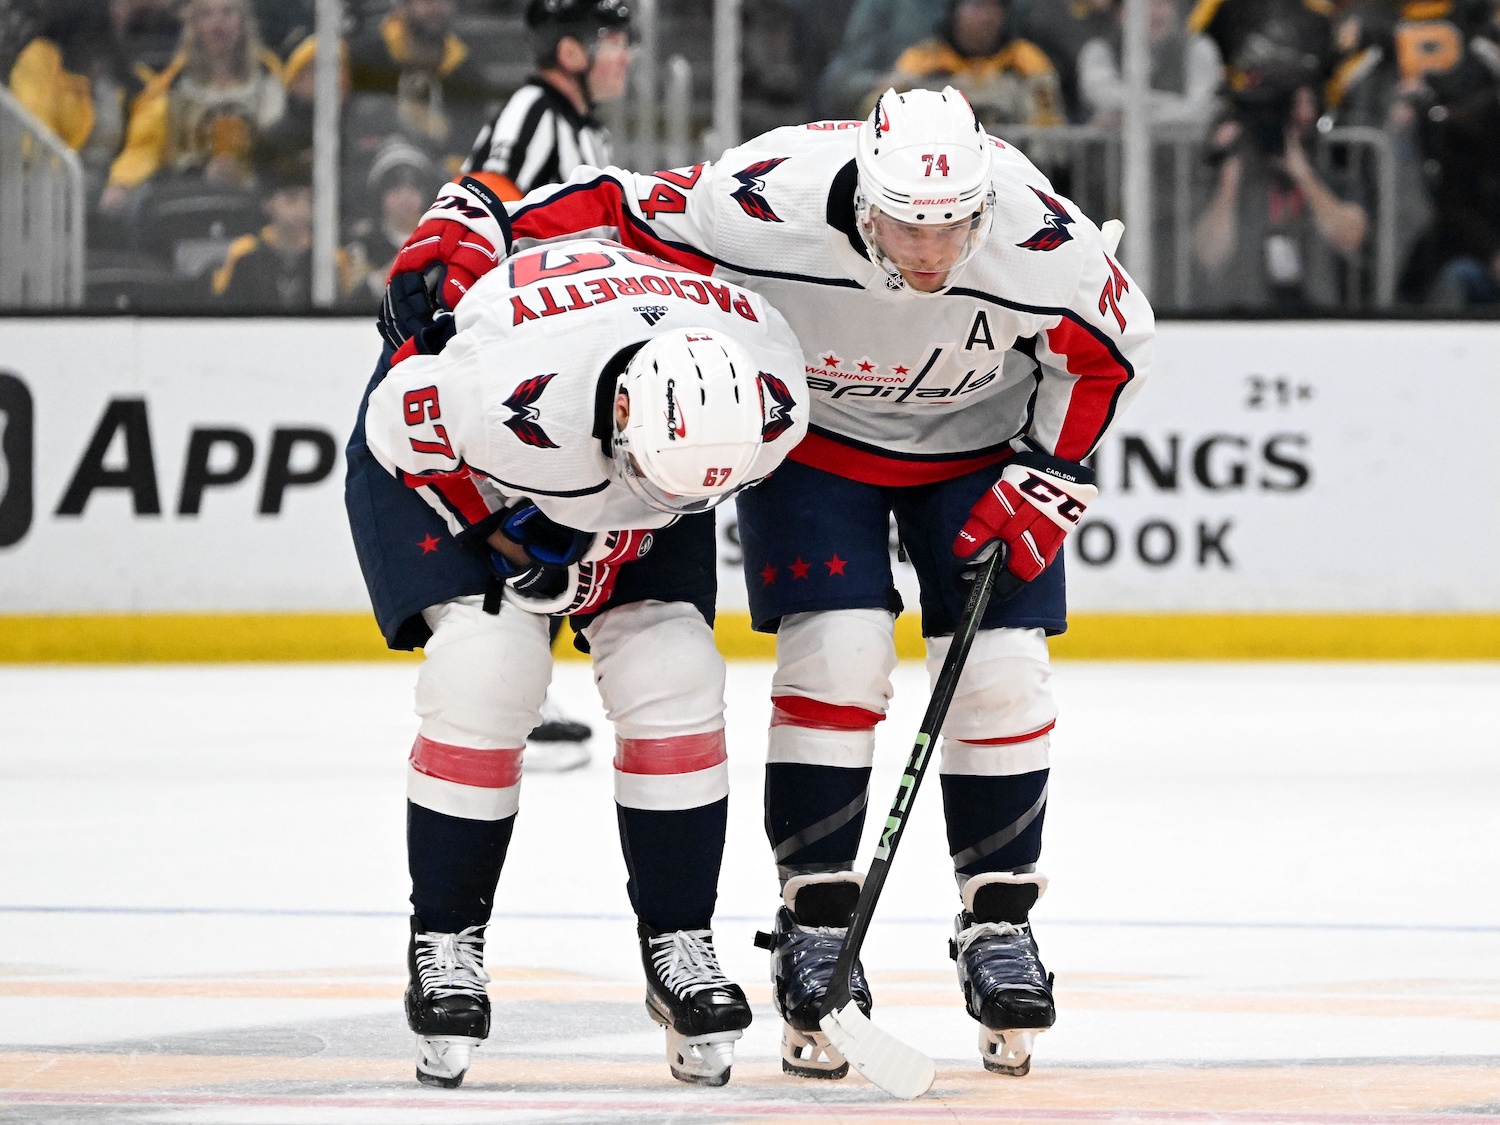 Feb 10, 2024; Boston, Massachusetts, USA; Washington Capitals defenseman John Carlson (74) helps left wing Max Pacioretty (67) off of the ice after being speared by defenseman Matt Grzelcyk (not seen) during the first period at the TD Garden. Grzelcyk received a game misconduct. Mandatory Credit: Brian Fluharty-USA TODAY Sports